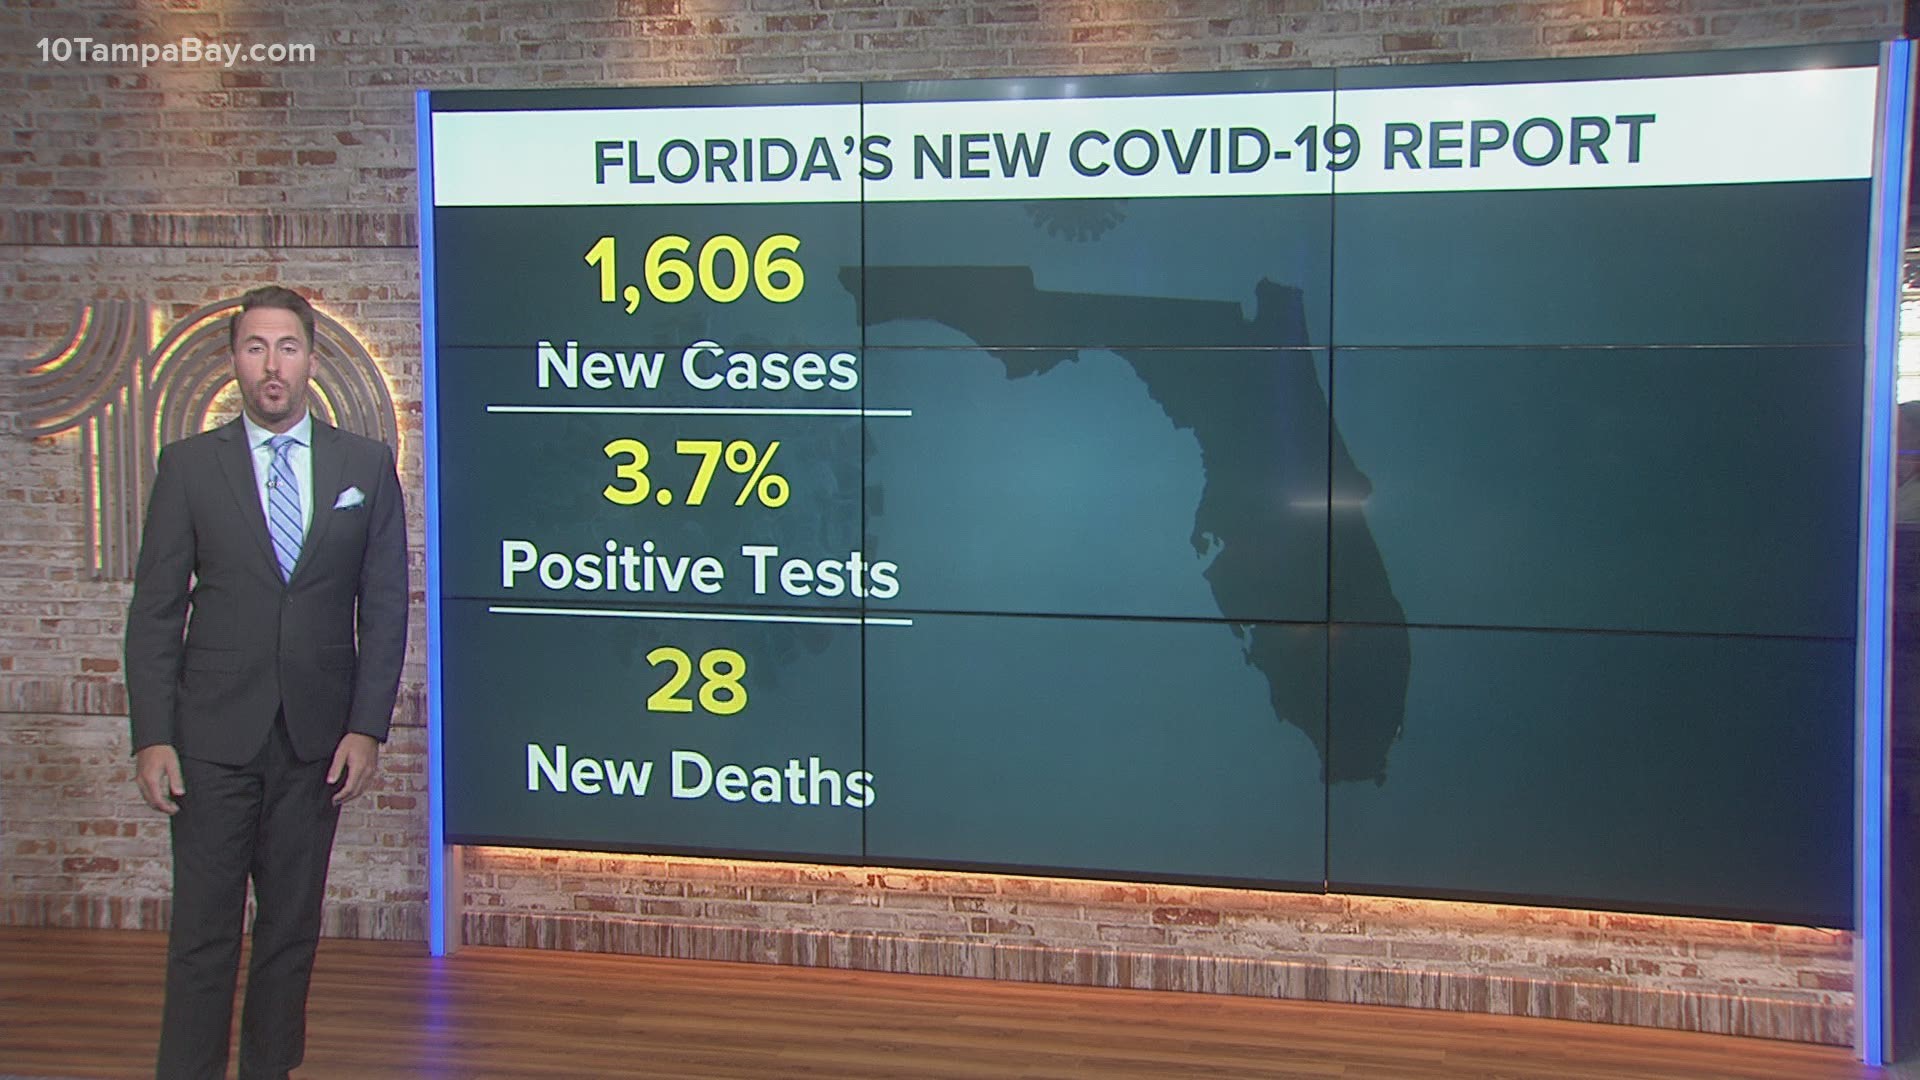 A total of 2,311,941 people in the state have tested positive for COVID-19 since the pandemic began.